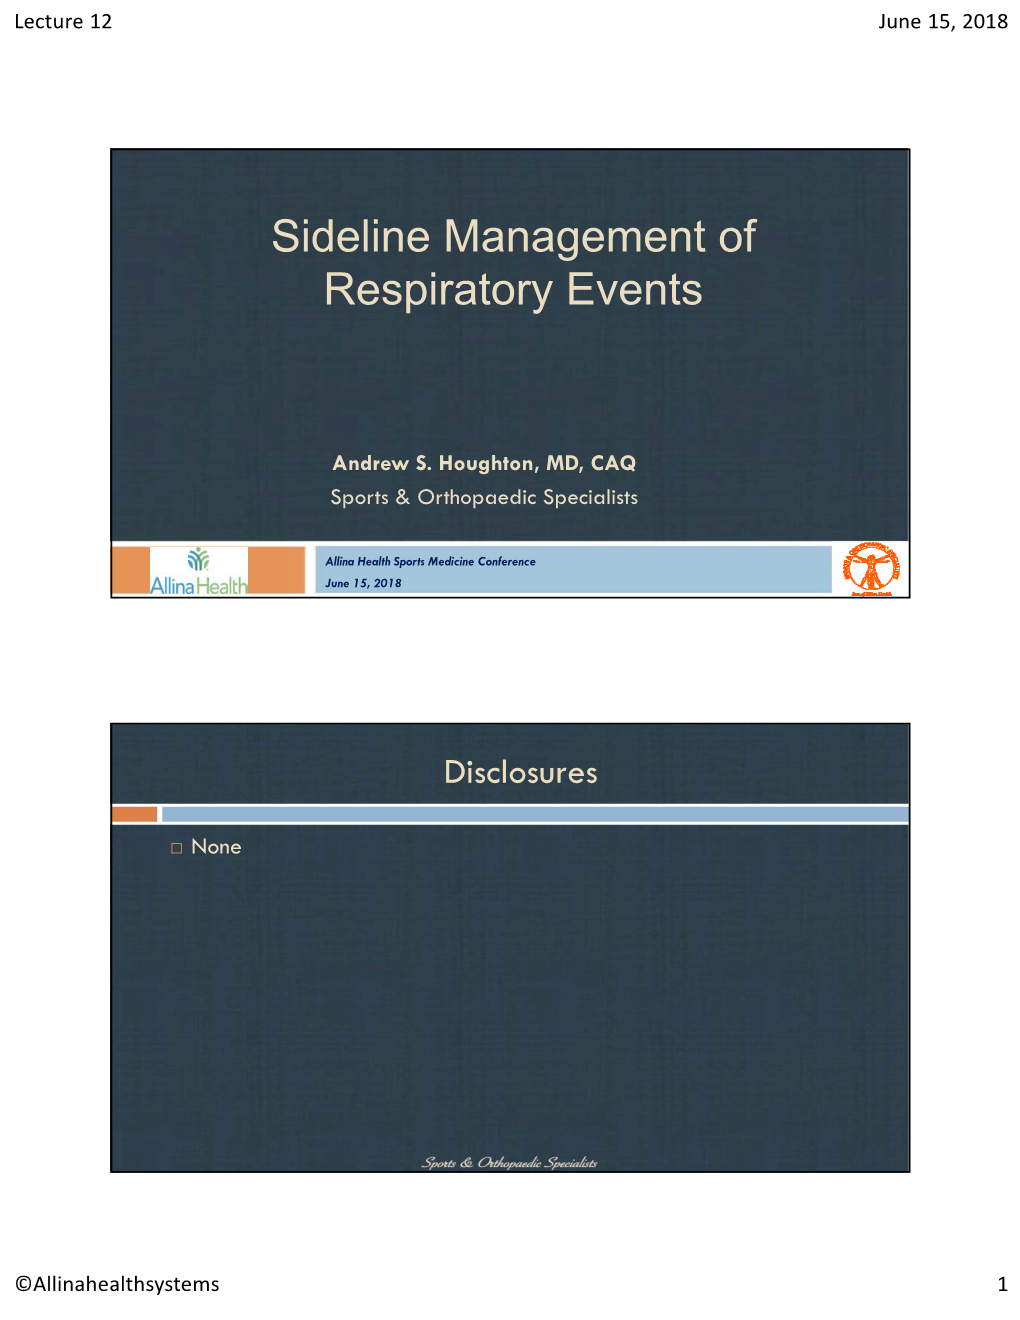 Sideline Management of Respiratory Events